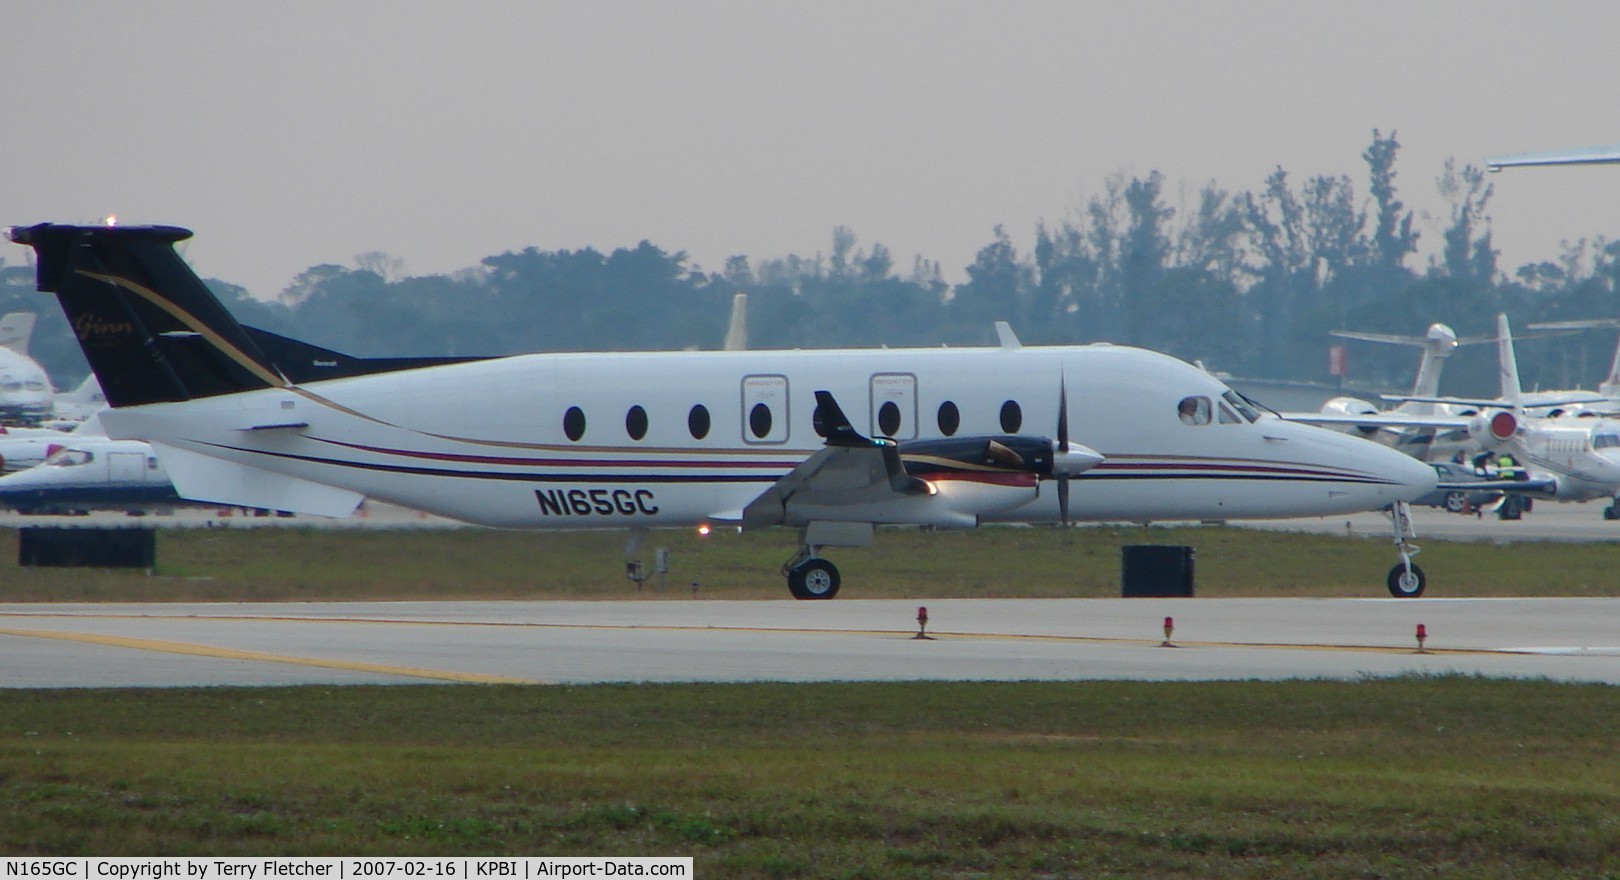 N165GC, 1999 Raytheon Aircraft Company 1900D C/N UE-378, part of the Friday afternoon arrivals 'rush' at PBI